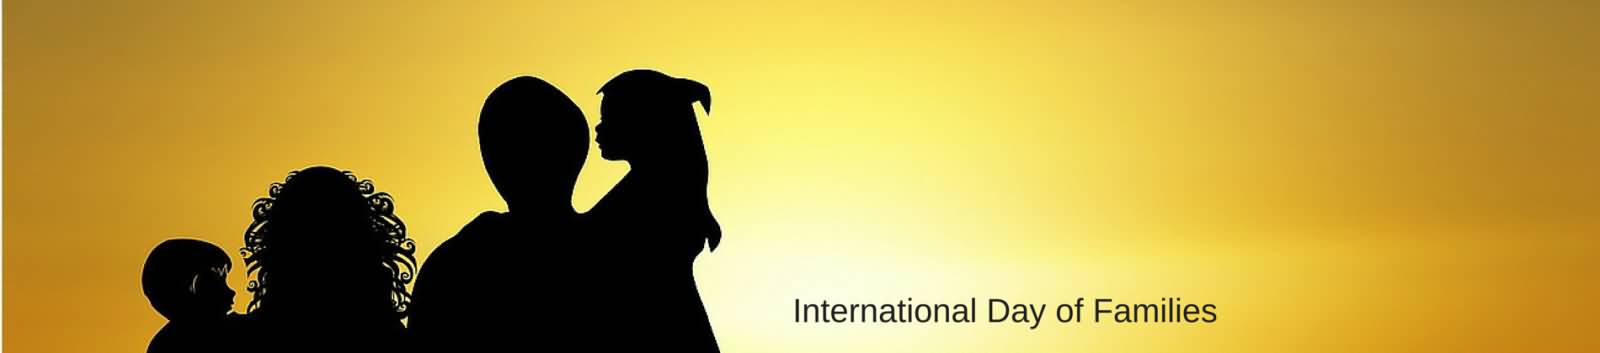 International Day Of Families Header Image